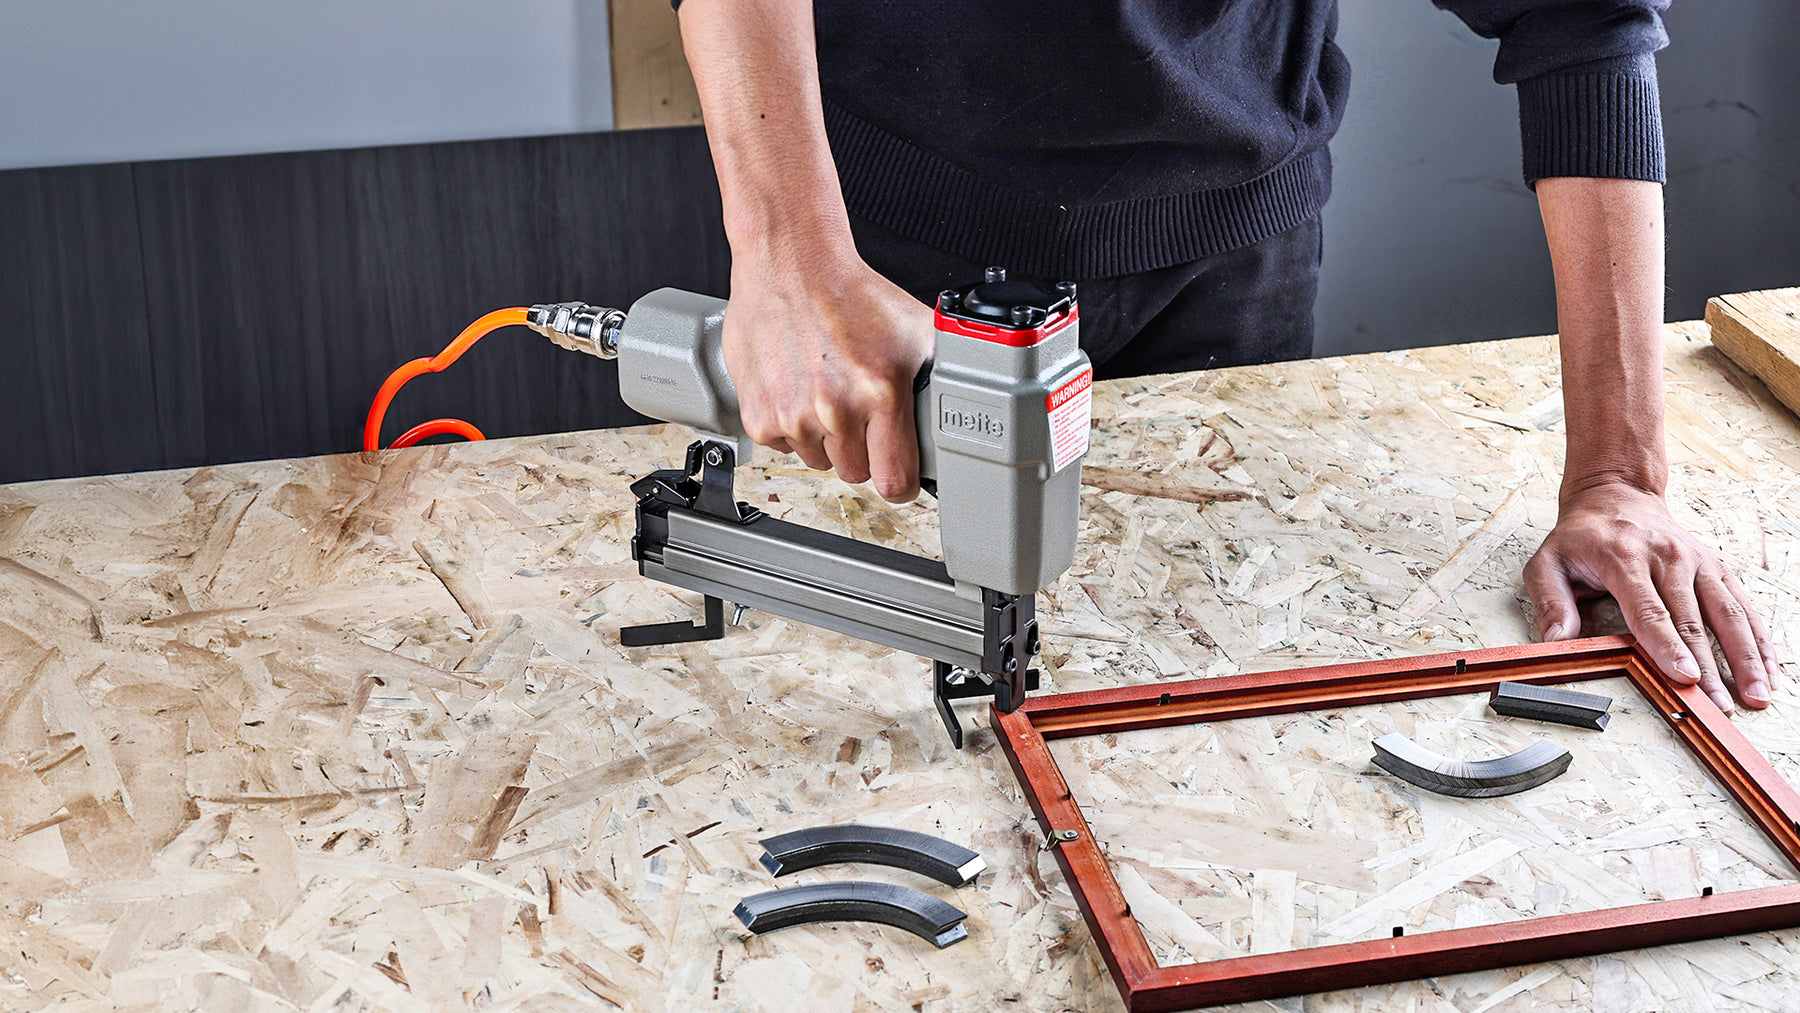 How to Use Picture Frame Nailer V1015B Professionally? - MEITE USA